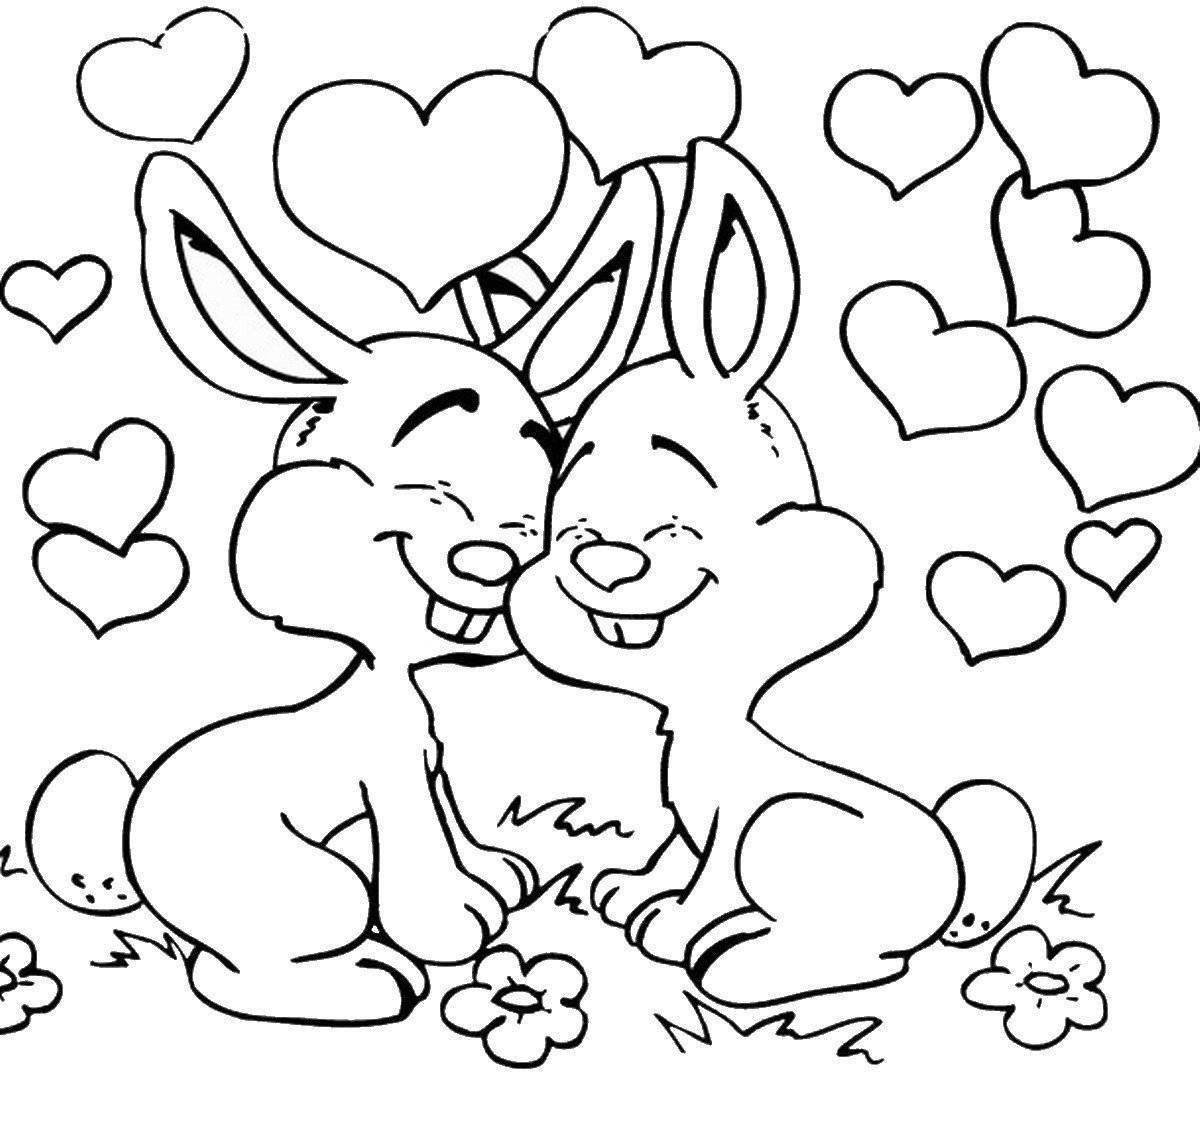 Coloring page beckoning love